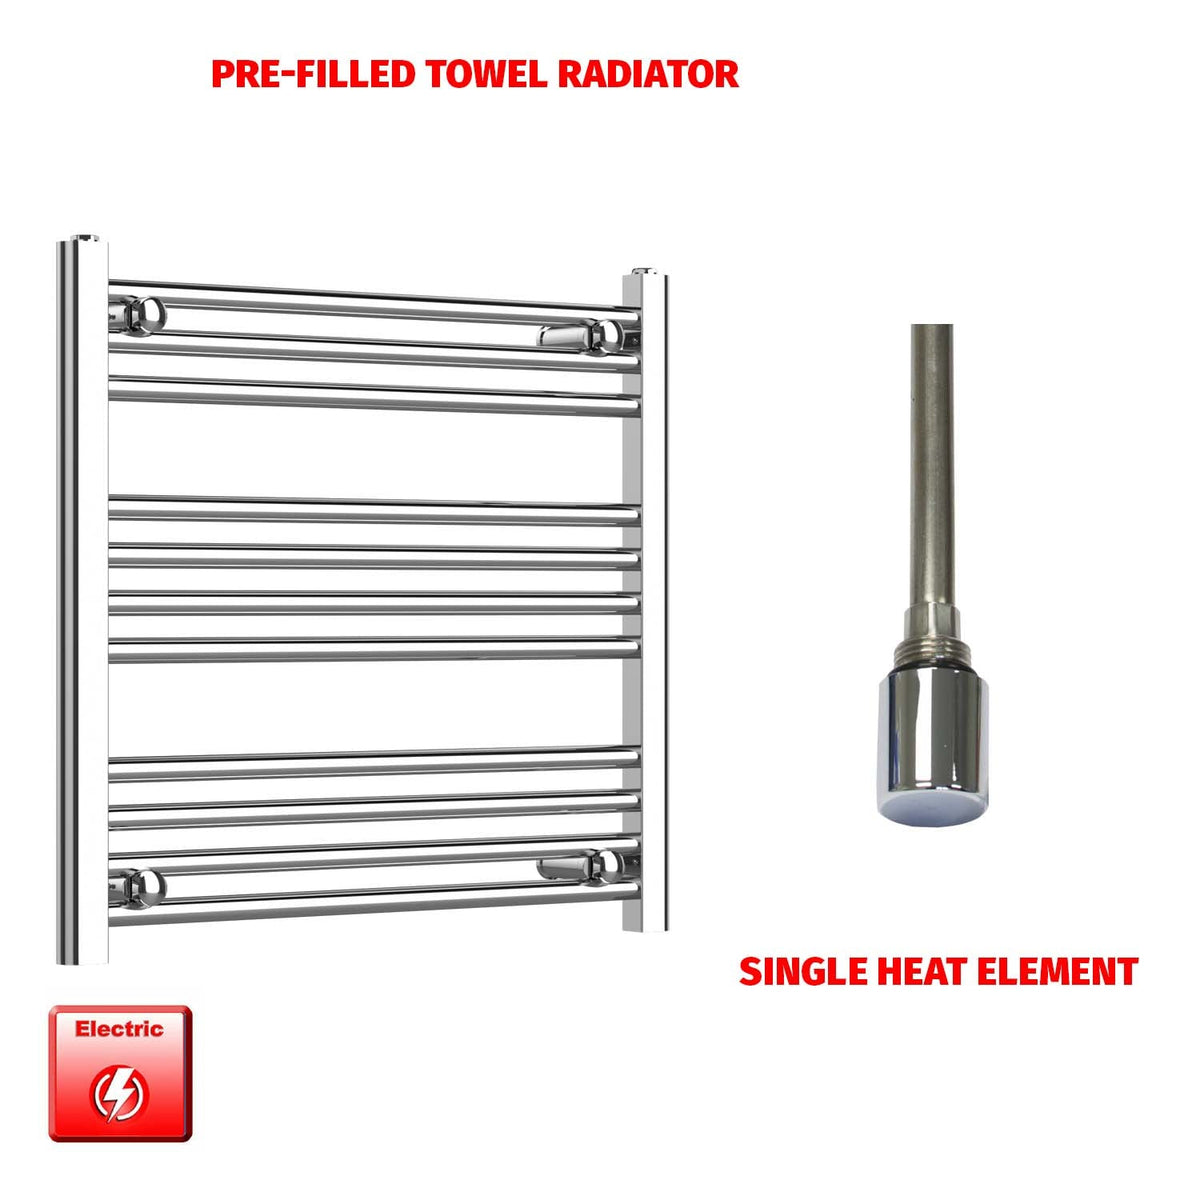 600mm High 600mm Wide Pre-Filled Electric Heated Towel Radiator Straight or Curved Chrome